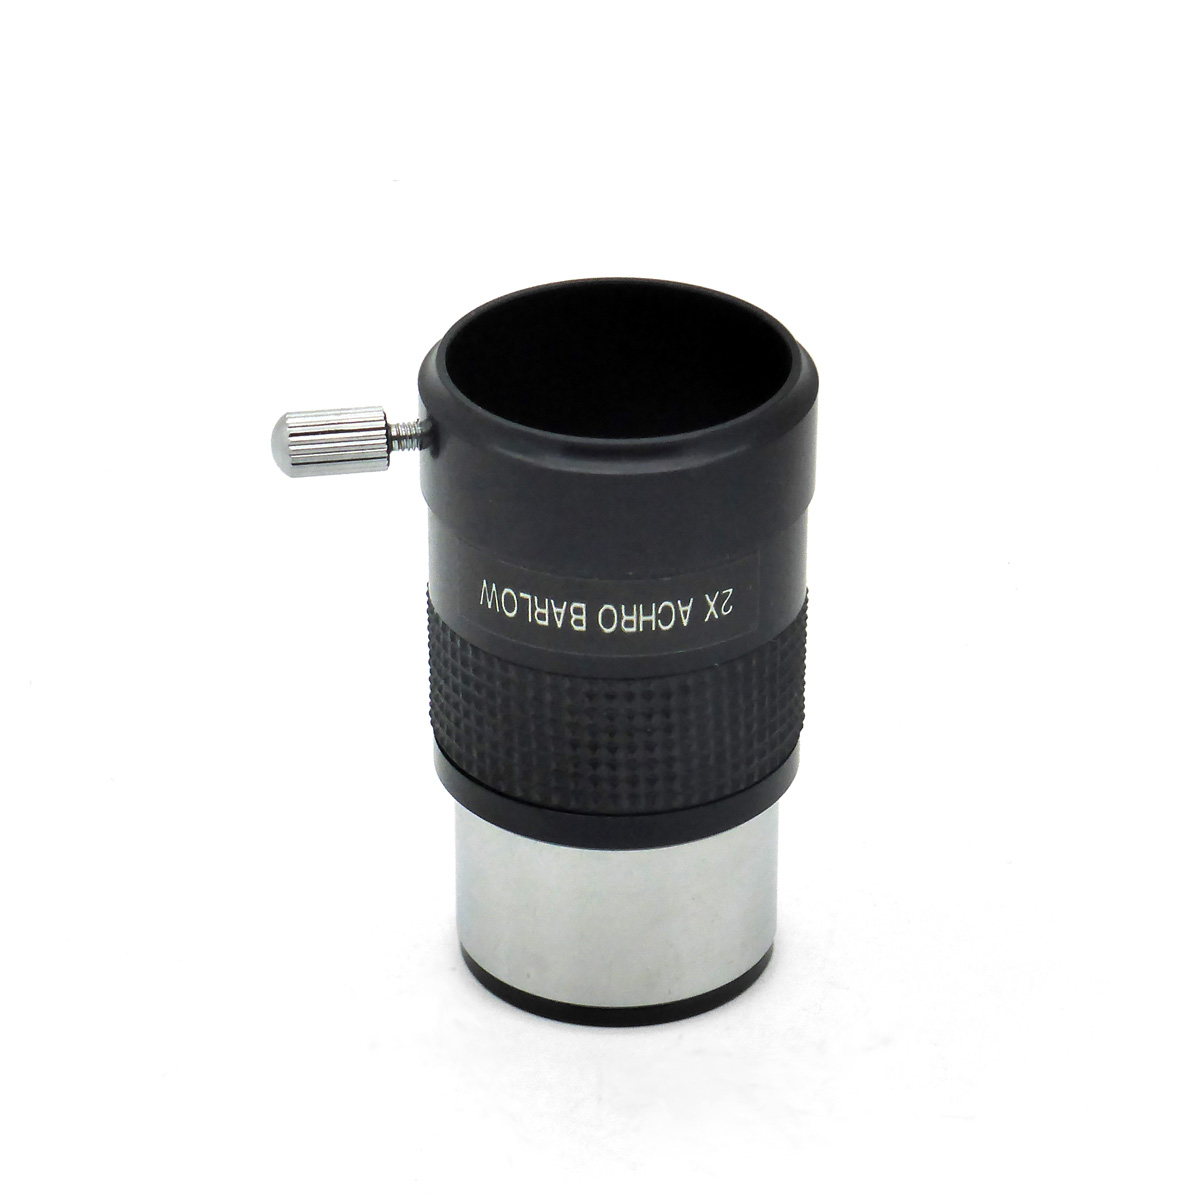 SkyWatcher 2x 2 Inch ED Deluxe Barlow Lens With 1.25 Inch Adapter UK Stock 